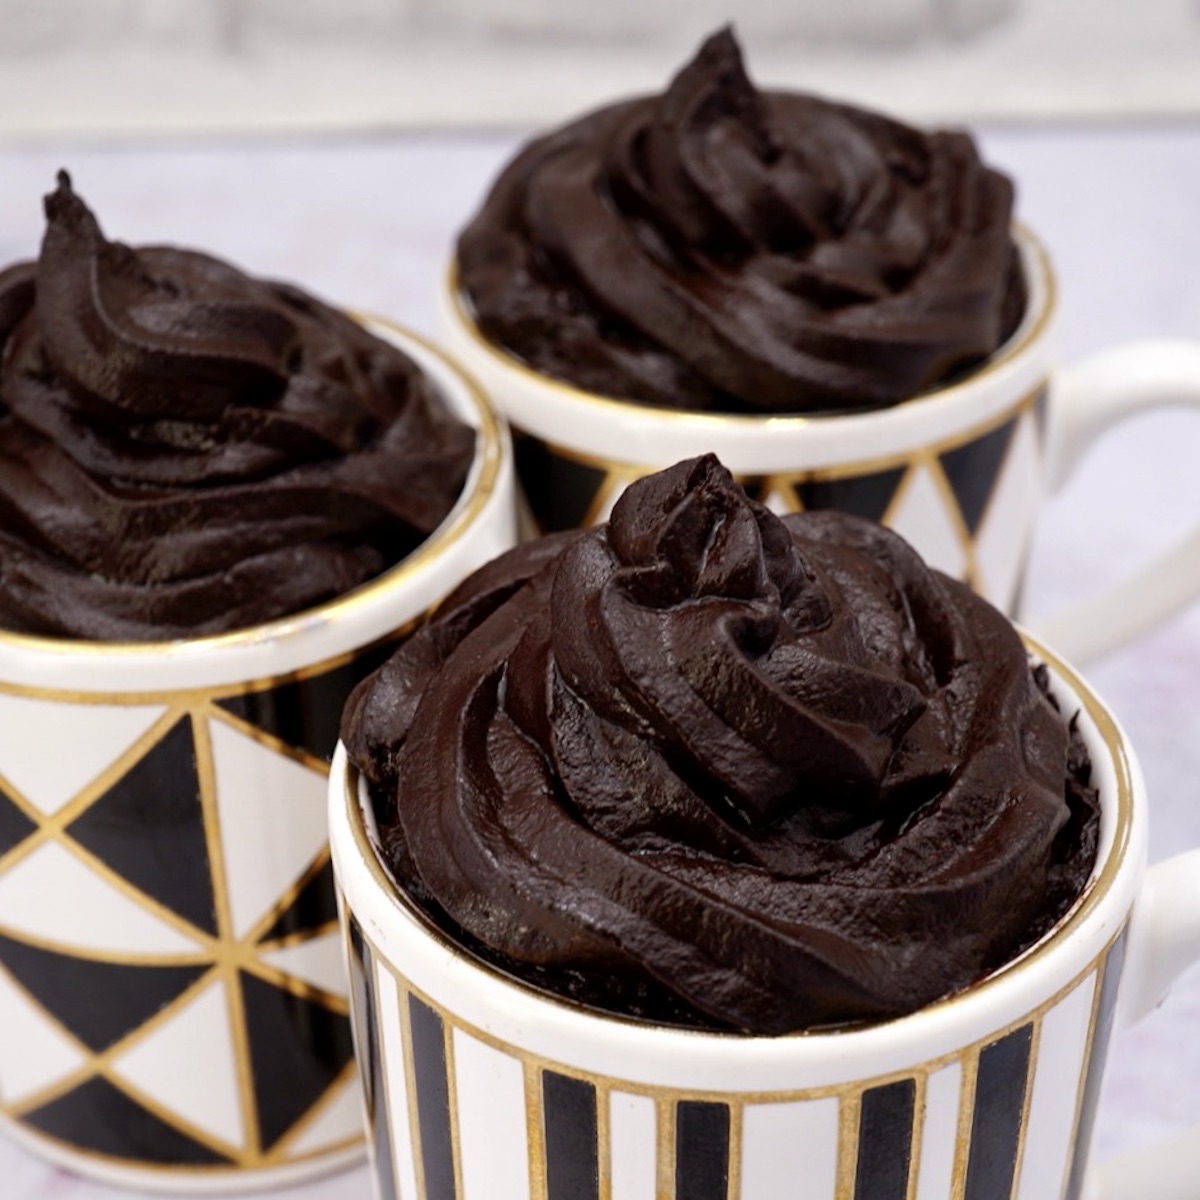 Three cups containing avocado chocolate mousse.